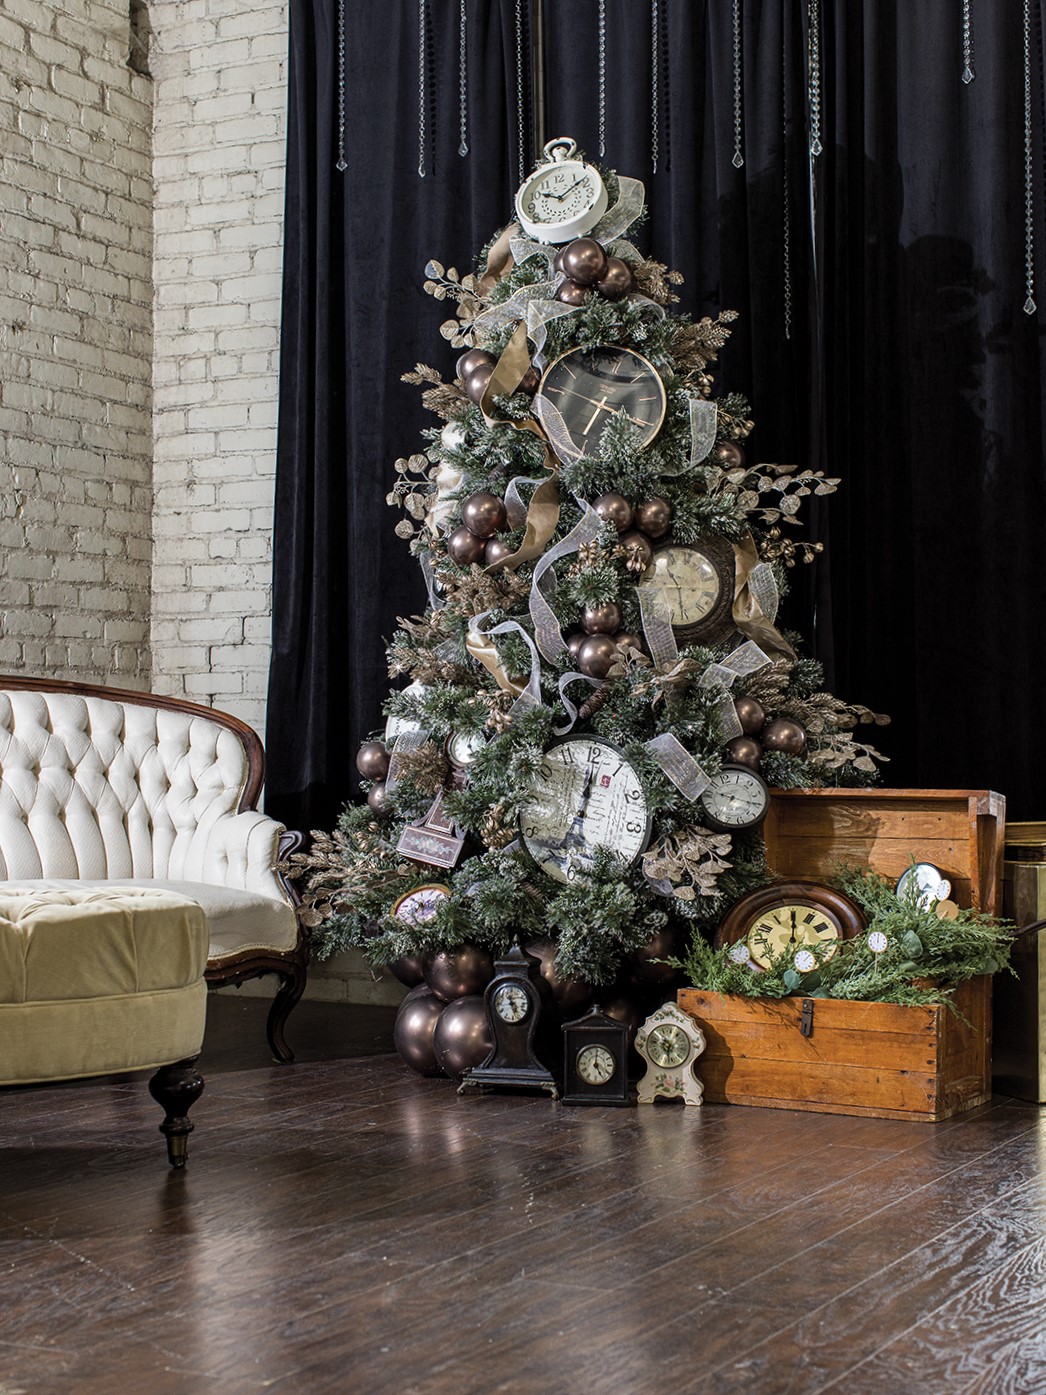 Don’t rush to take down that holiday tree. Instead, turn it into your centerpiece. Hendrickson suggests hunting for items such as vintage clocks and old mirrors at second-hand stores, or searching free listings on Facebook Marketplace.